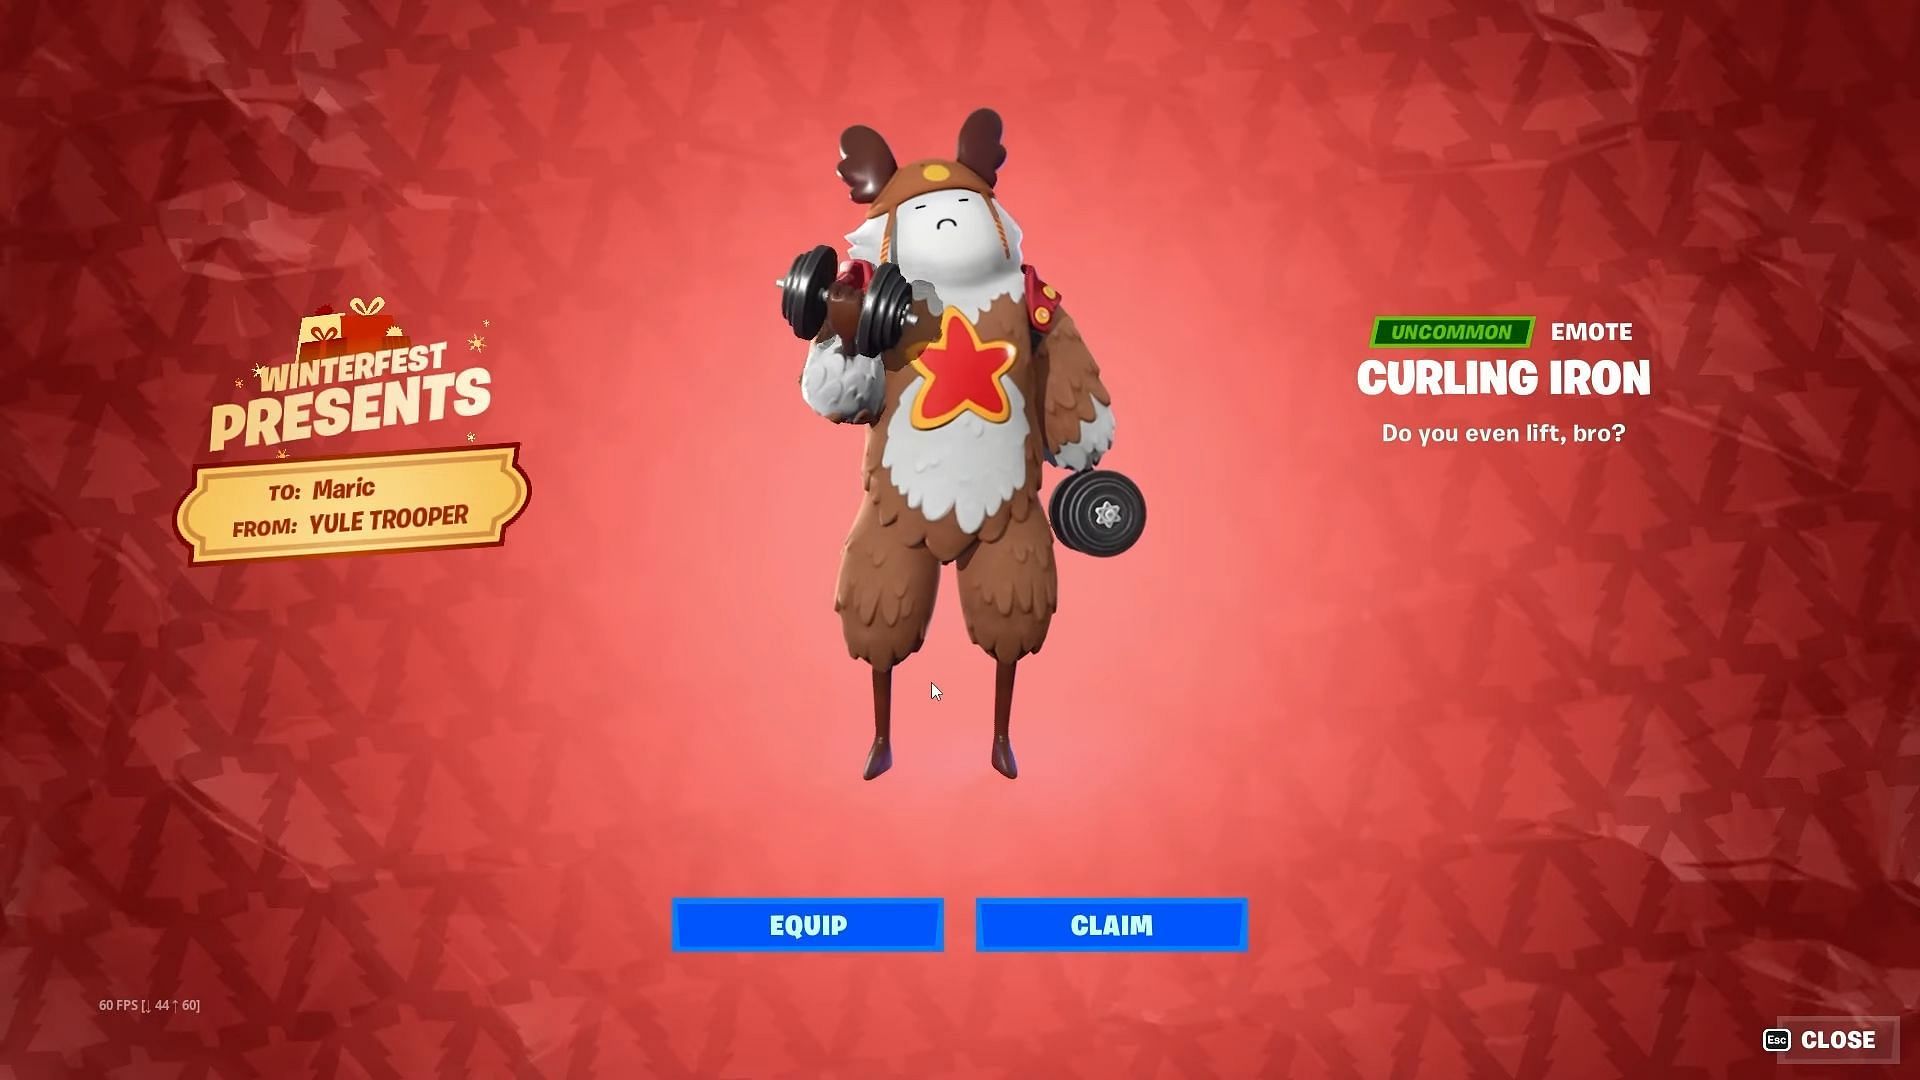 The Curling Iron emote was obtainable for free (Image via Epic Games)